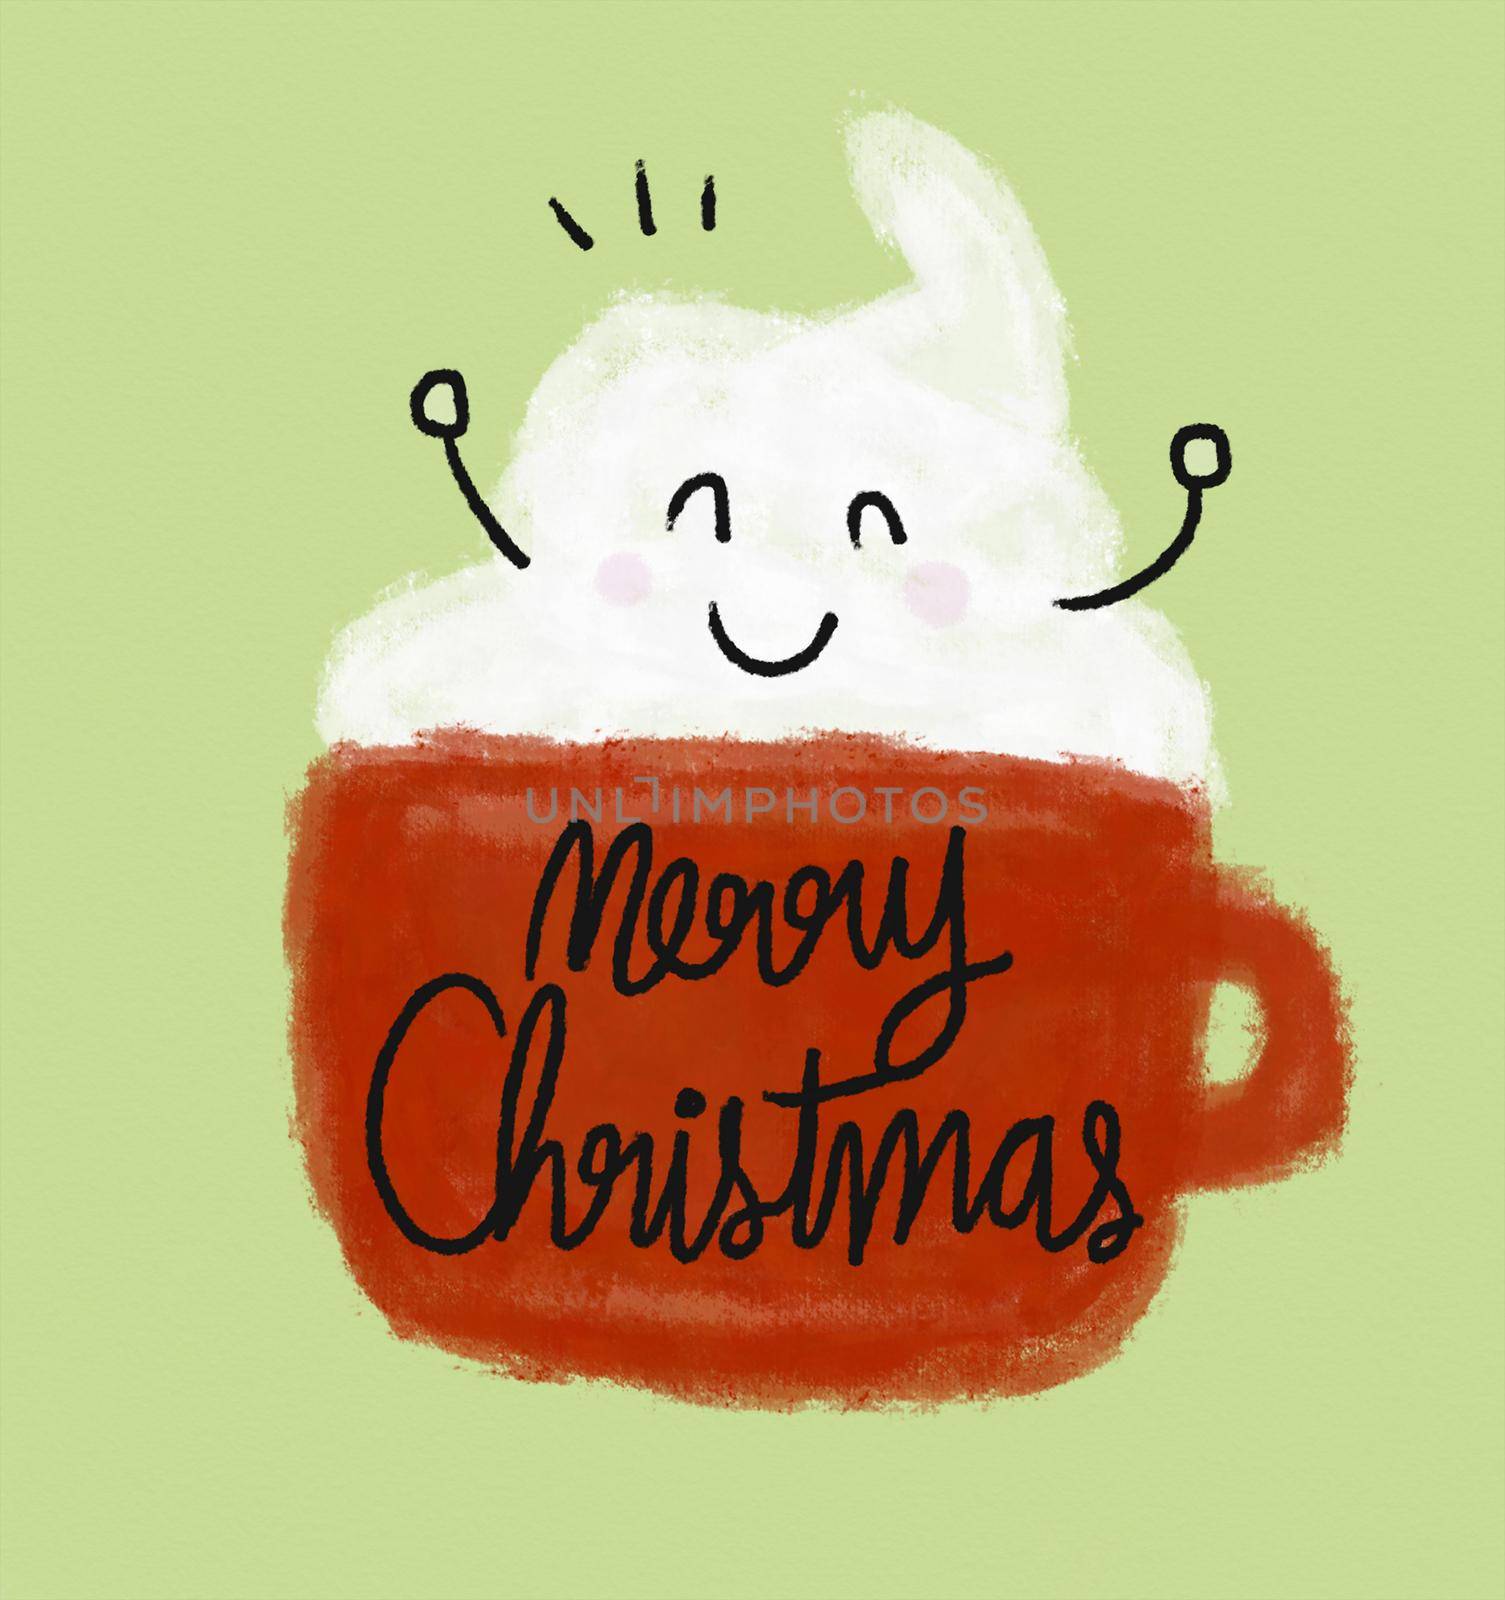 Merry Christmas coffee cup and smile face watercolor painting illustration by Yoopho